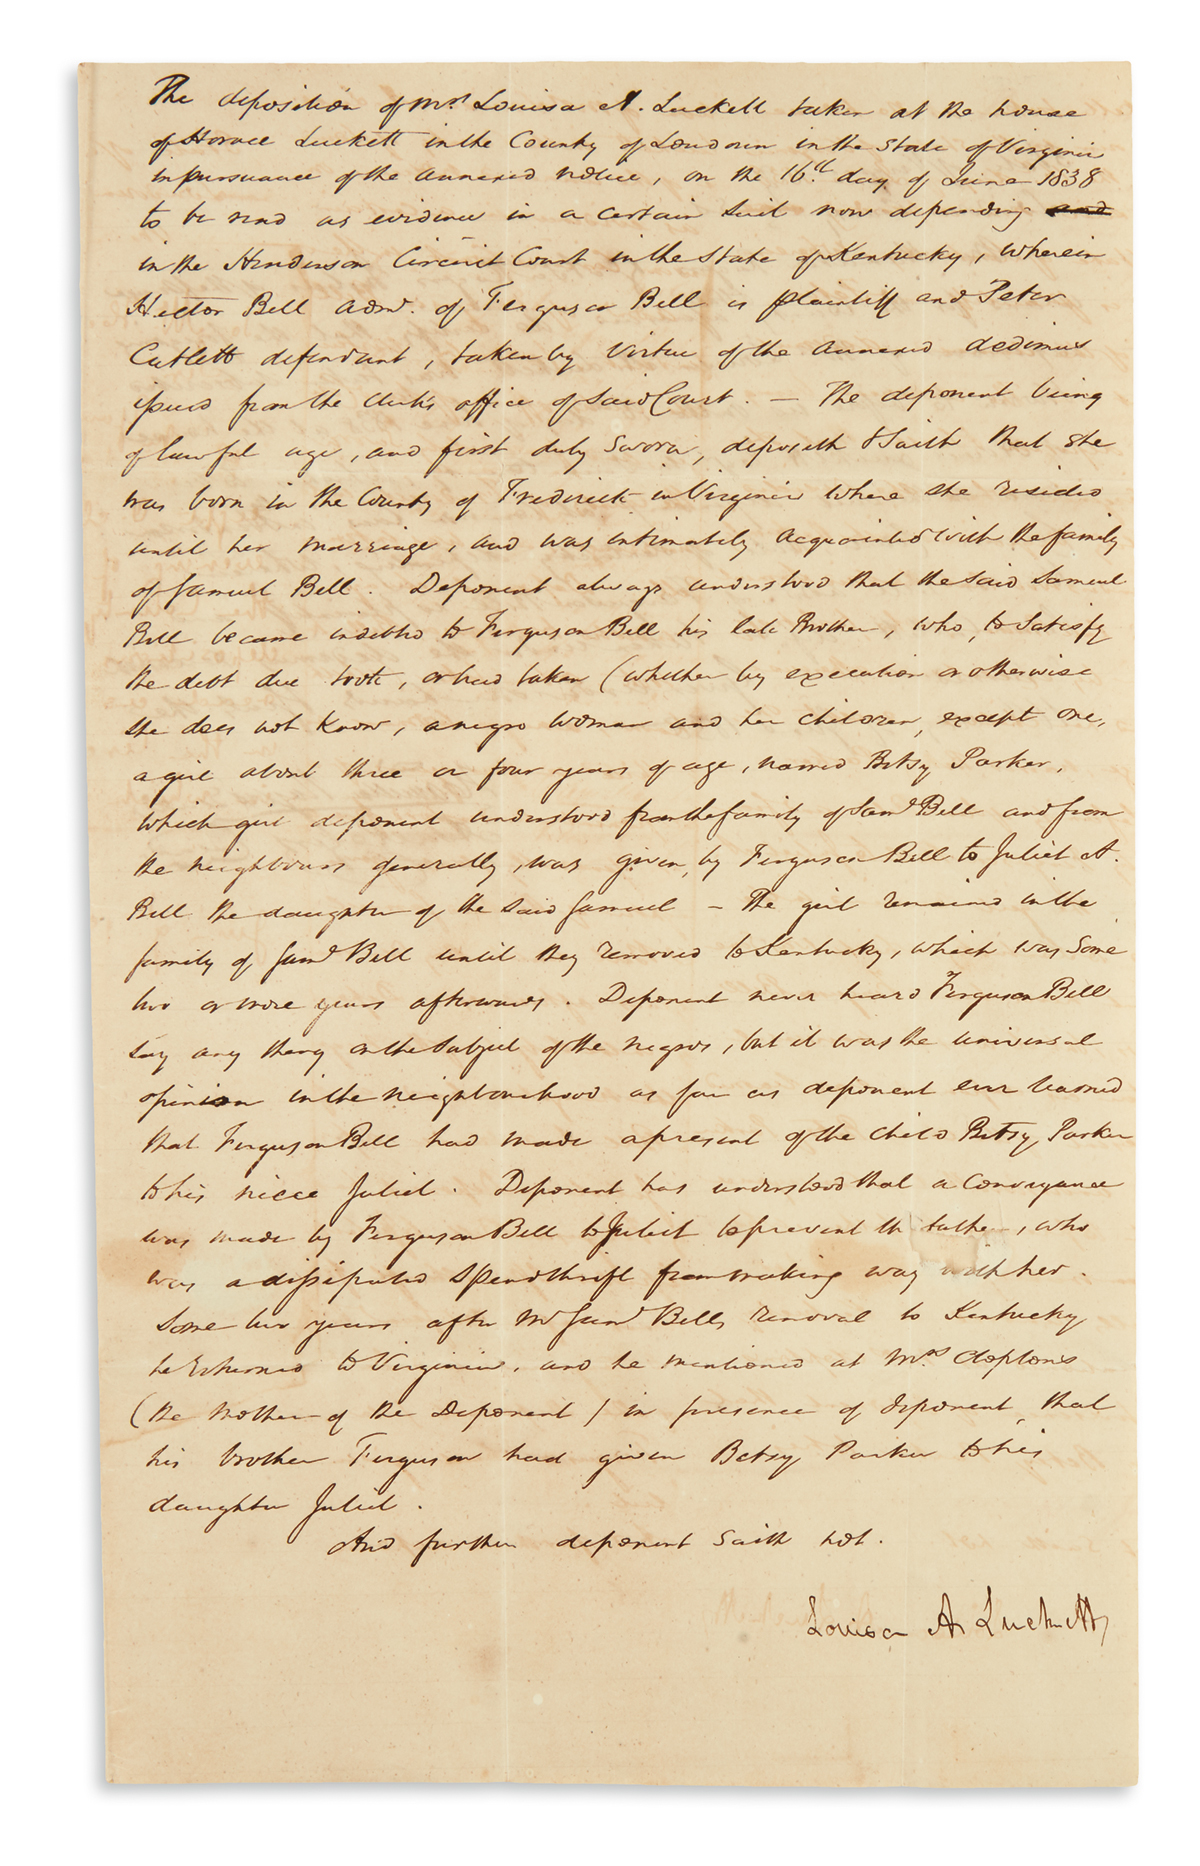 (SLAVERY AND ABOLITION.) Group of 11 slavery-related letters and documents.